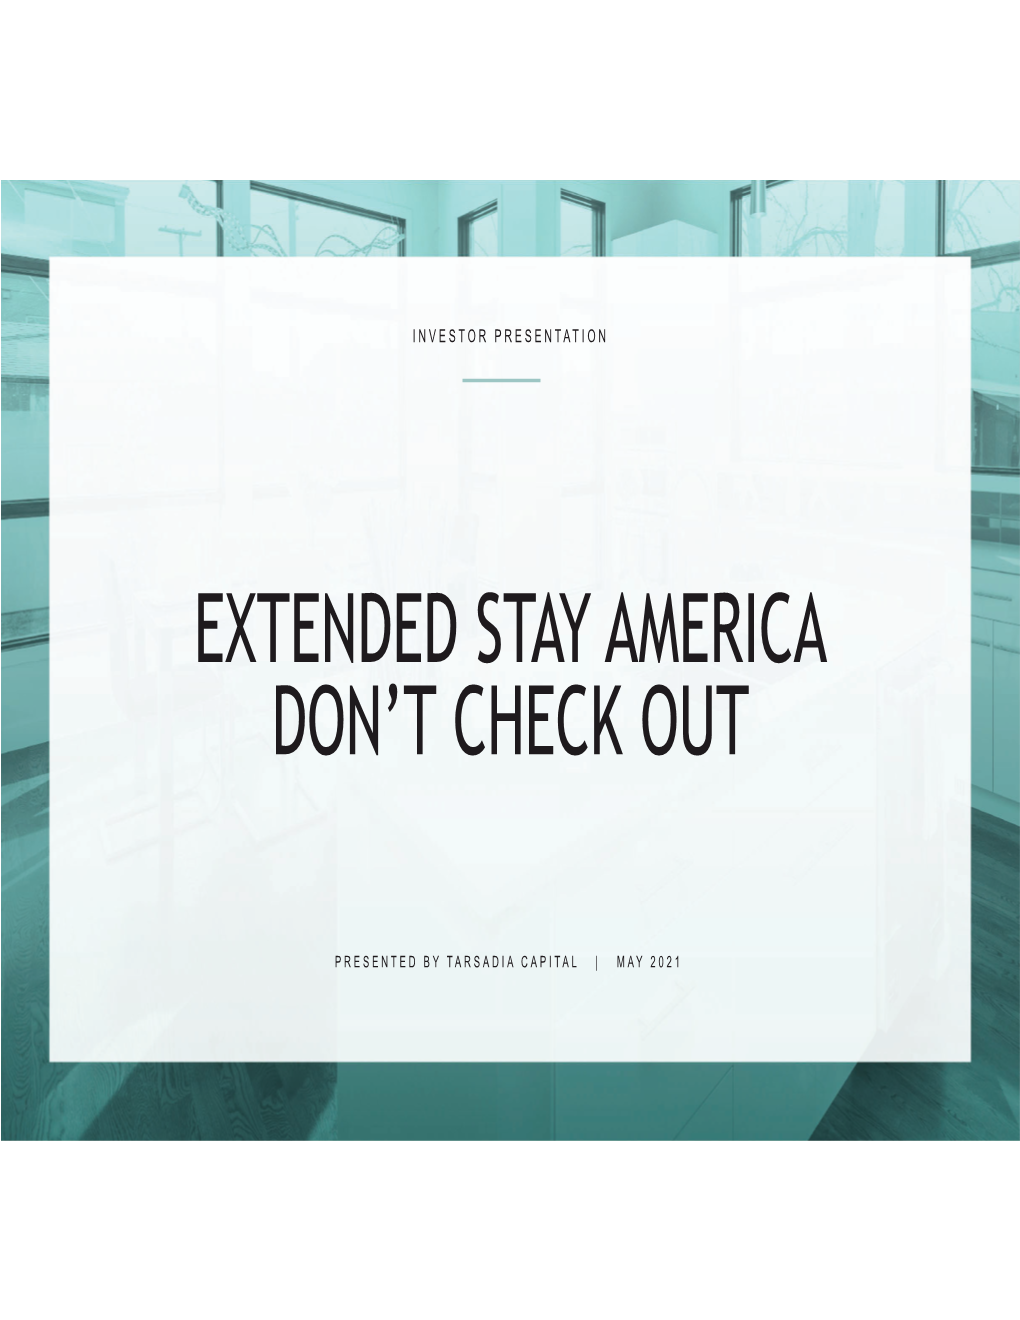 Extended Stay America Don’T Check Out